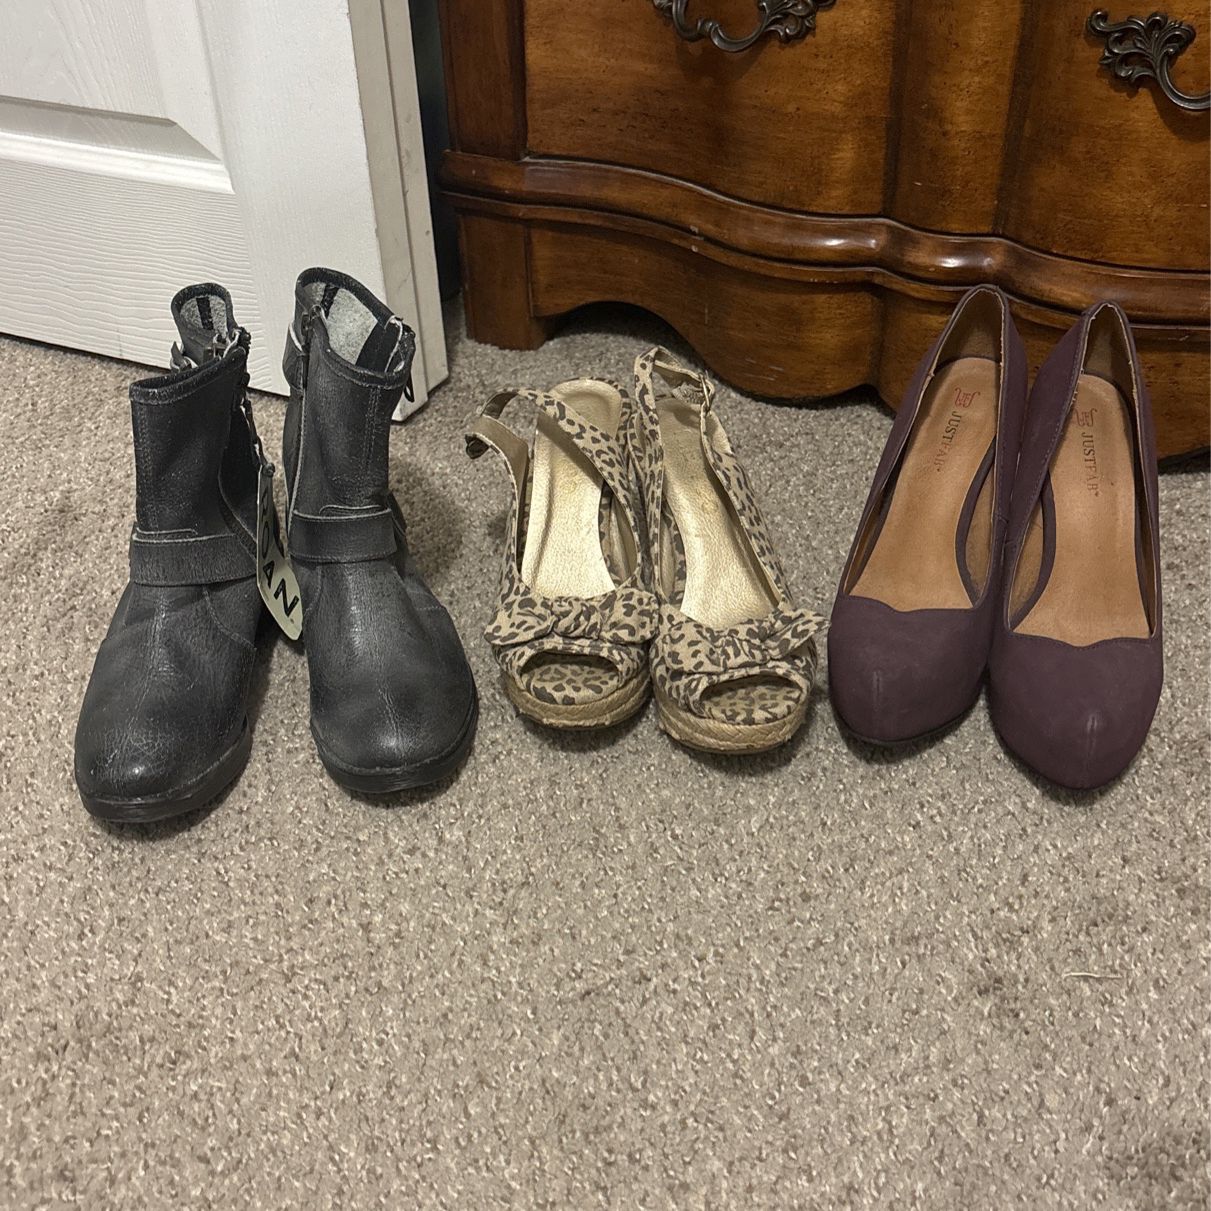 3 Pairs Women’s Shoes